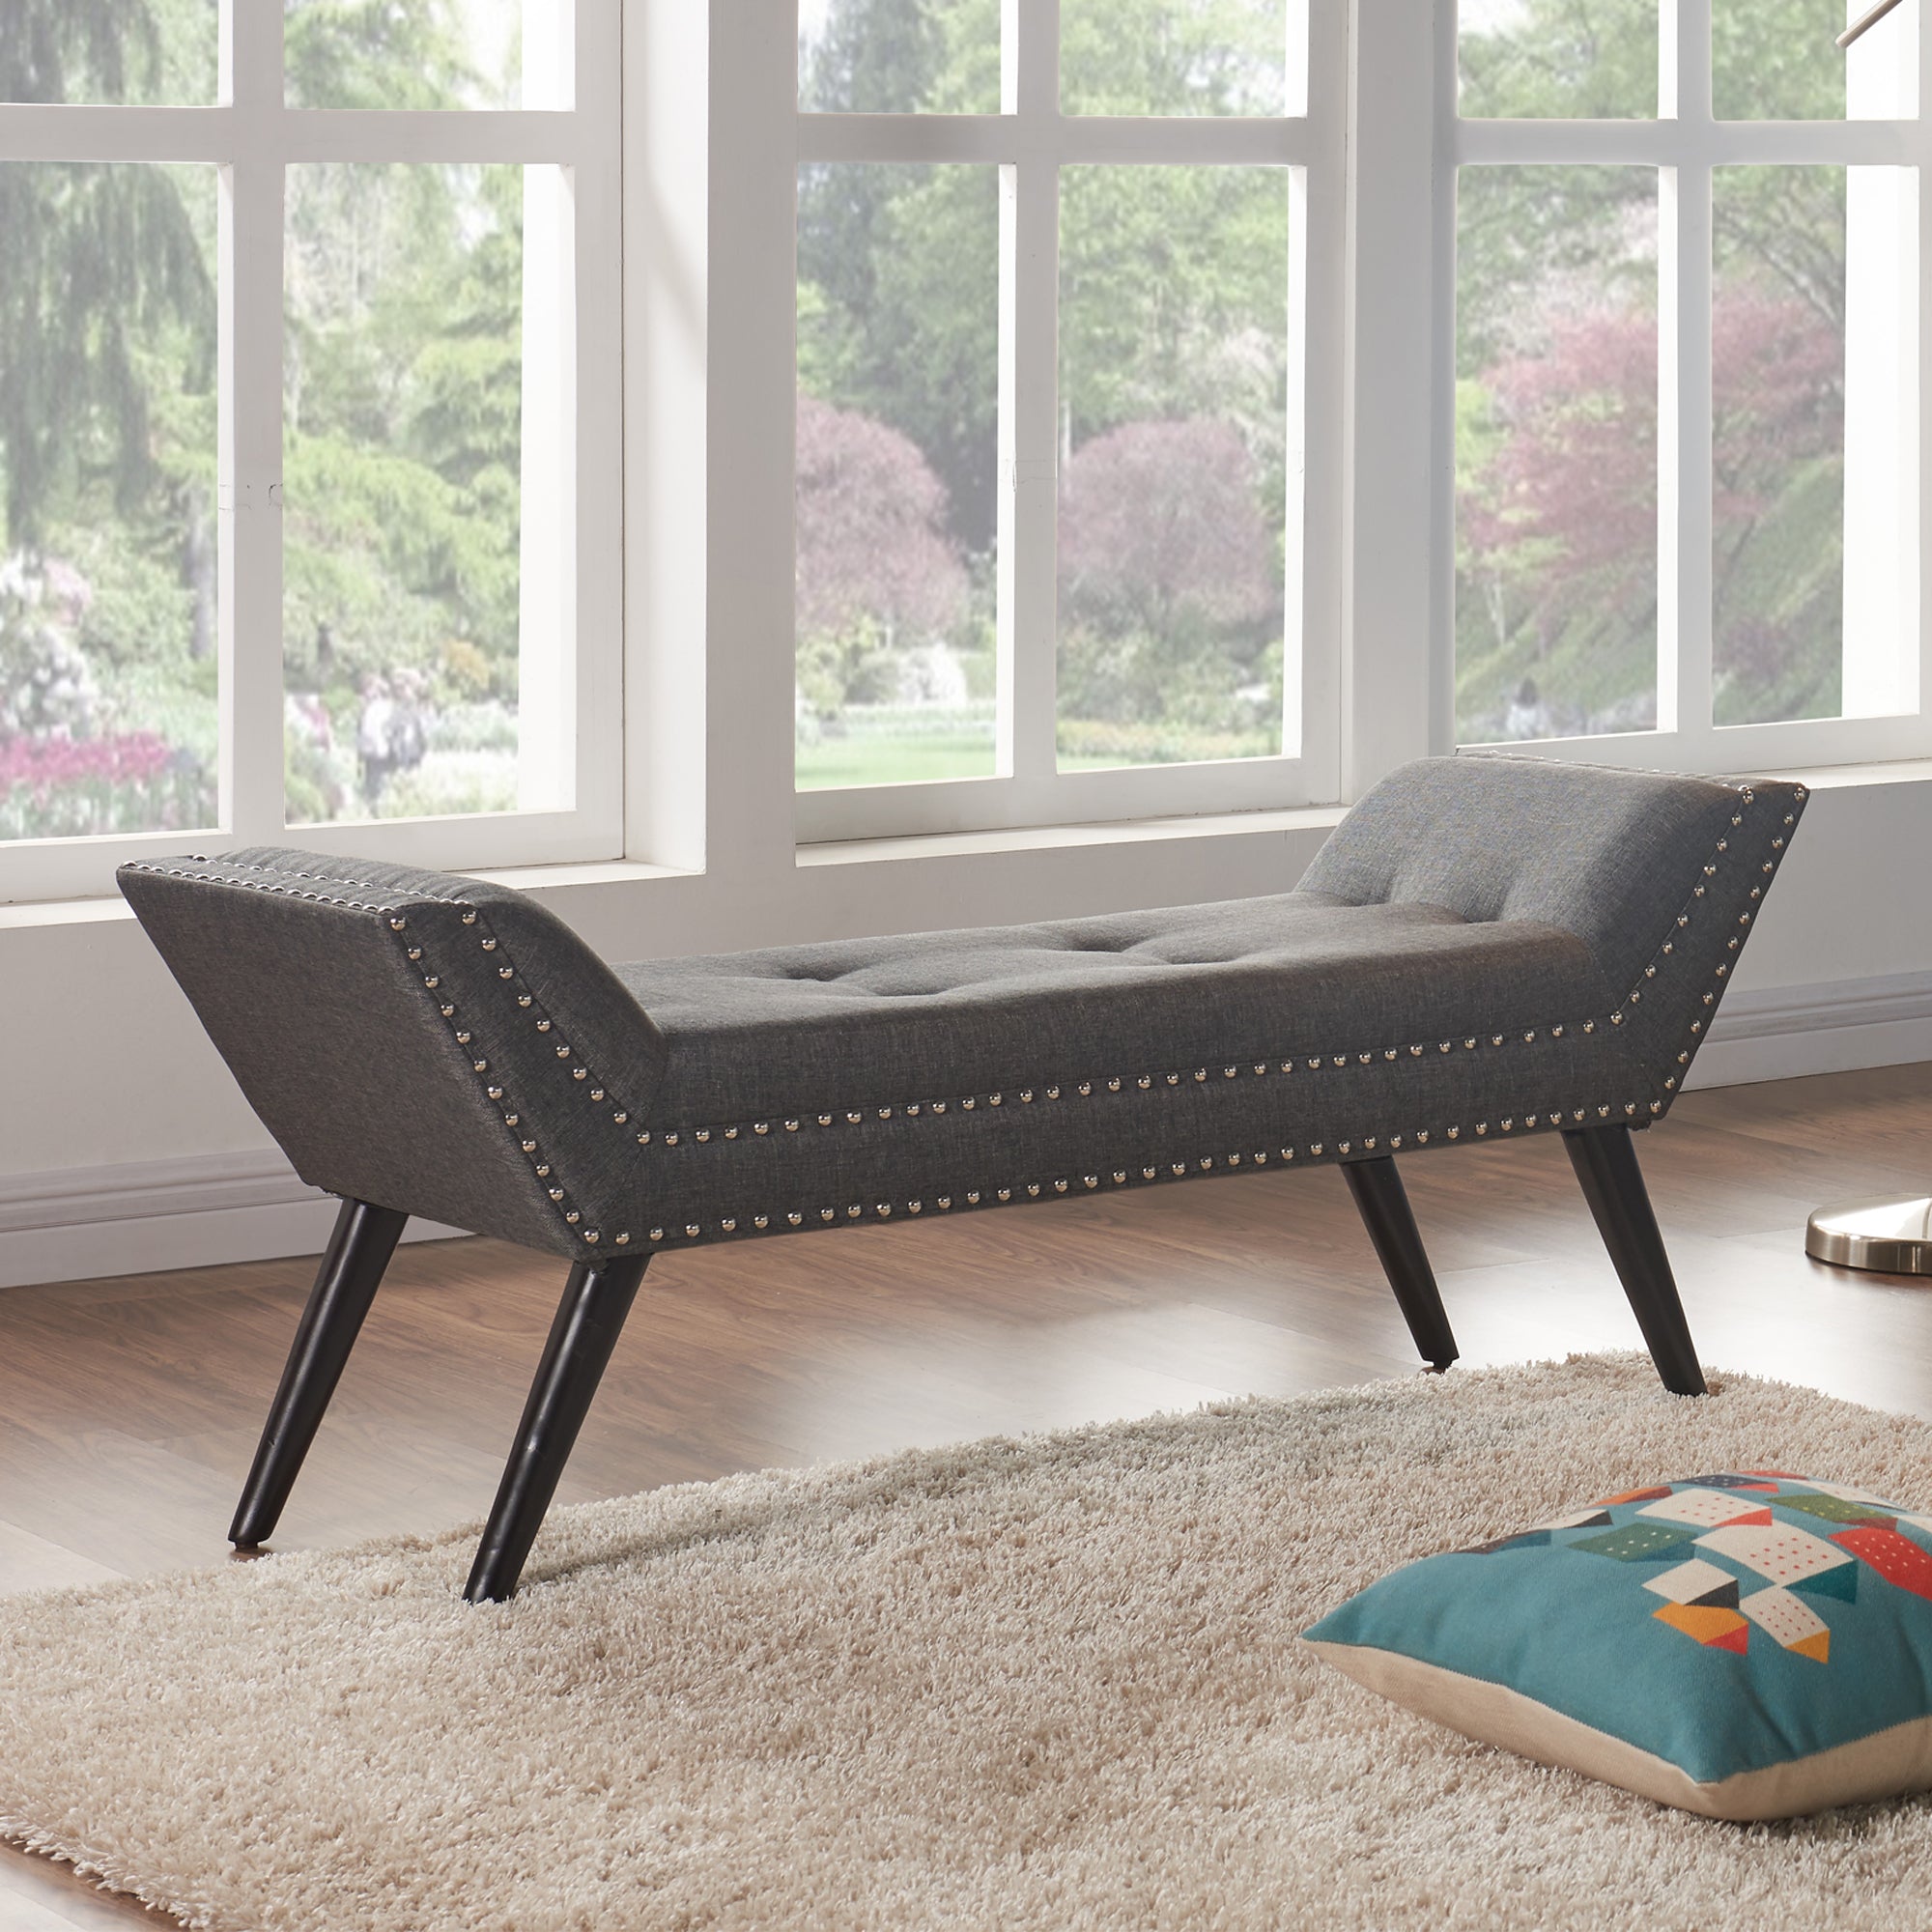 Armen Living Lcpobech Porter Ottoman Bench In Charcoal Fabric With Nailhead Trim And Espresso Wood Legs